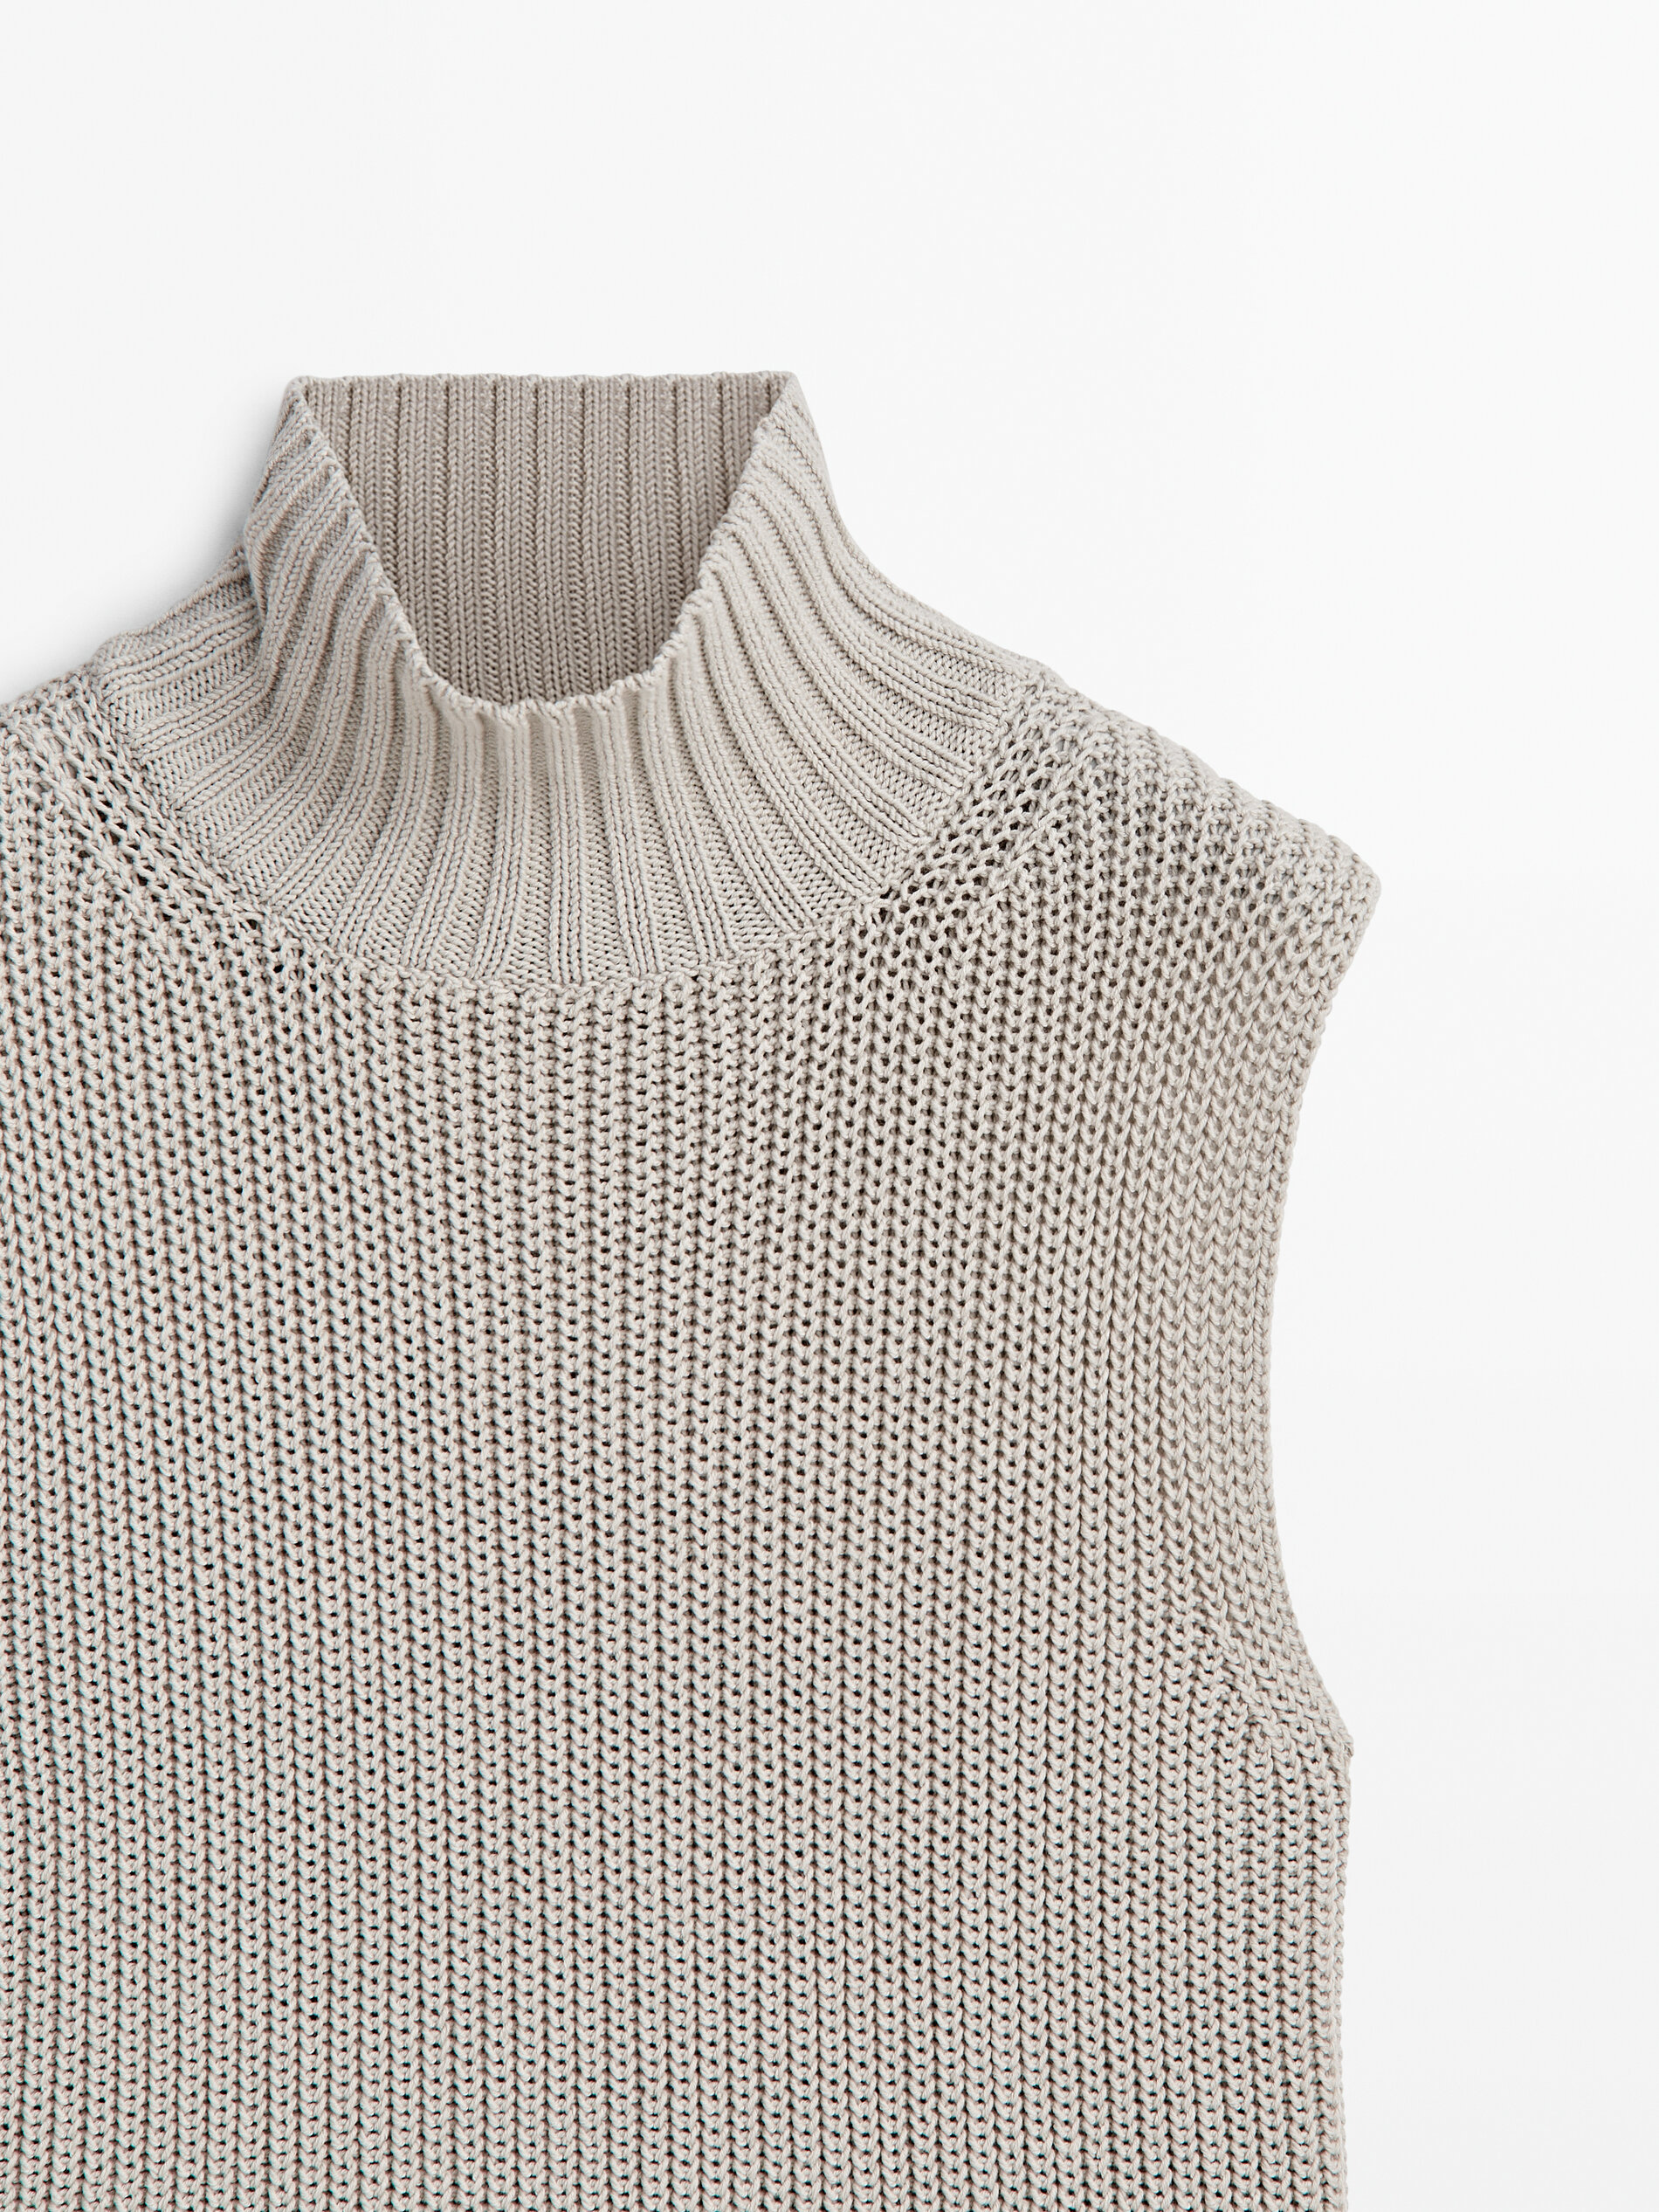 Purl knit vest with a mock turtleneck · Stone · Sweaters And